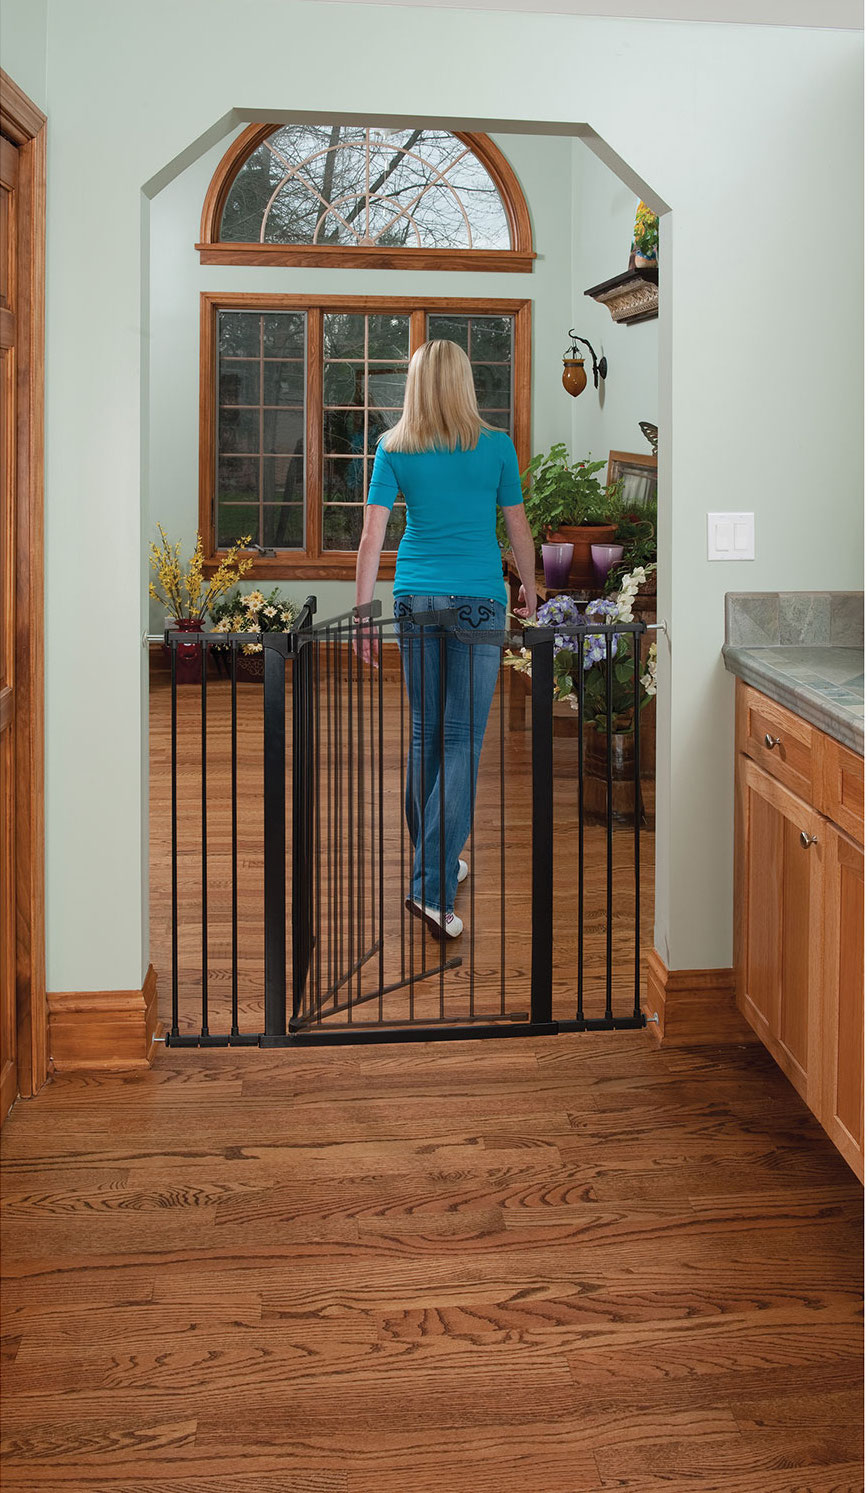 kidco pressure mount extra tall and wide auto close gateway safety gate